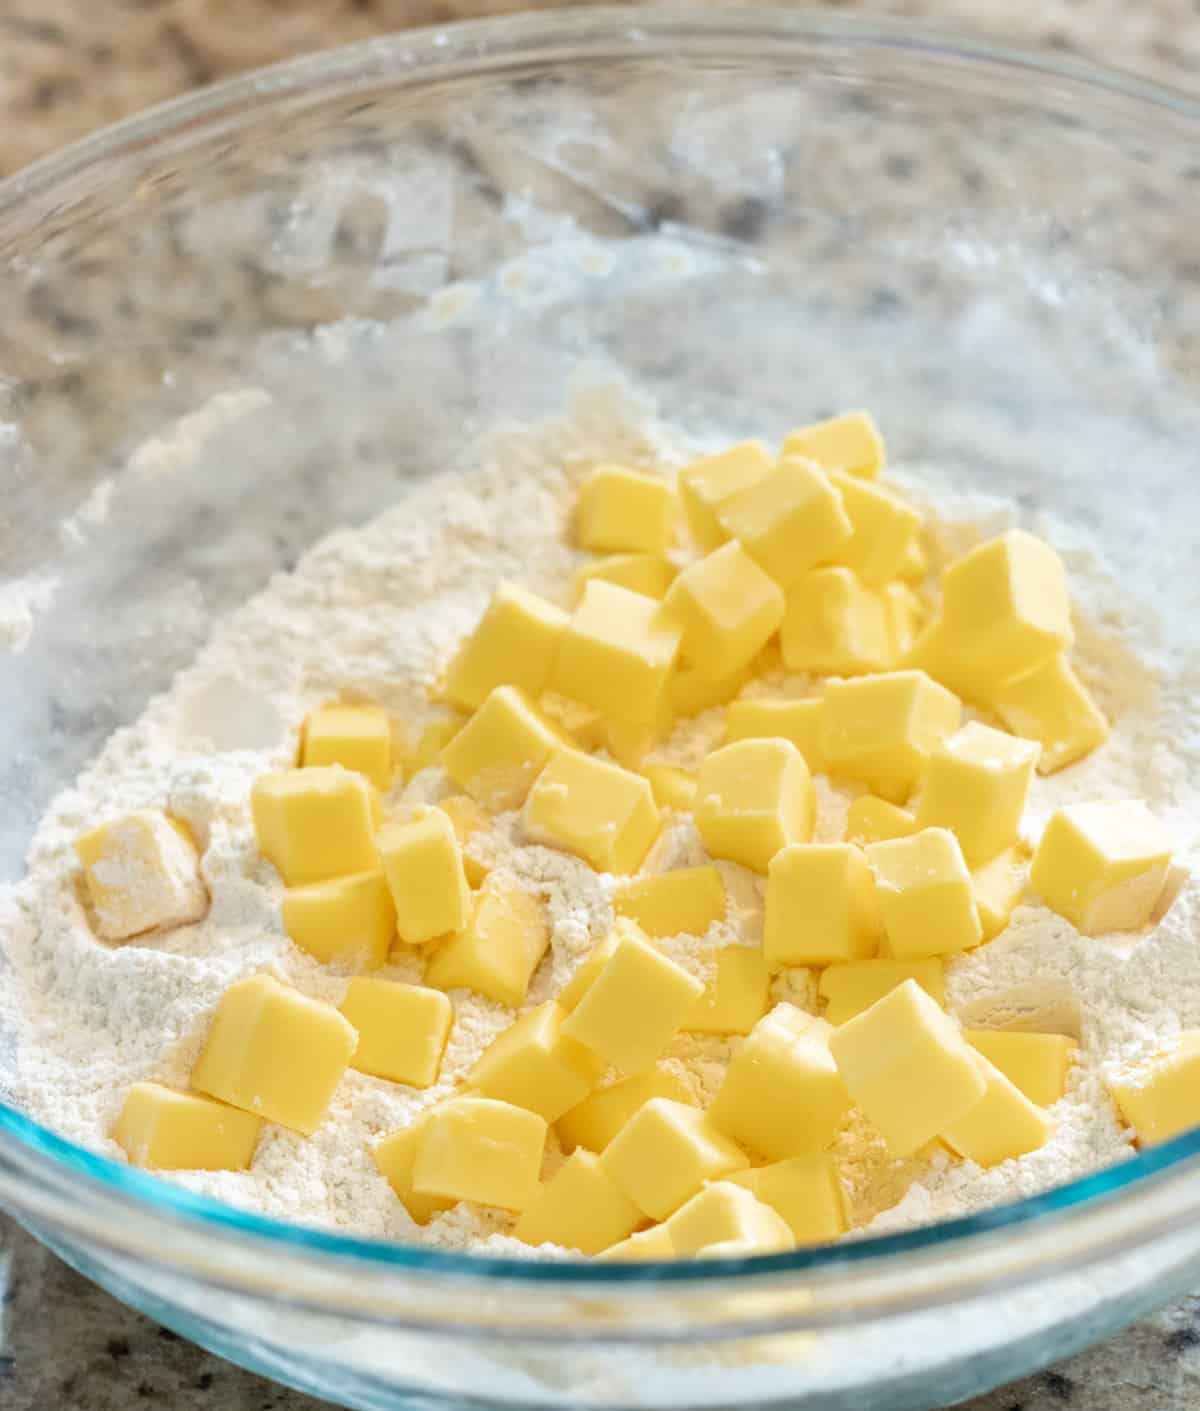 Butter cubes on top of flour in a glass bowl.